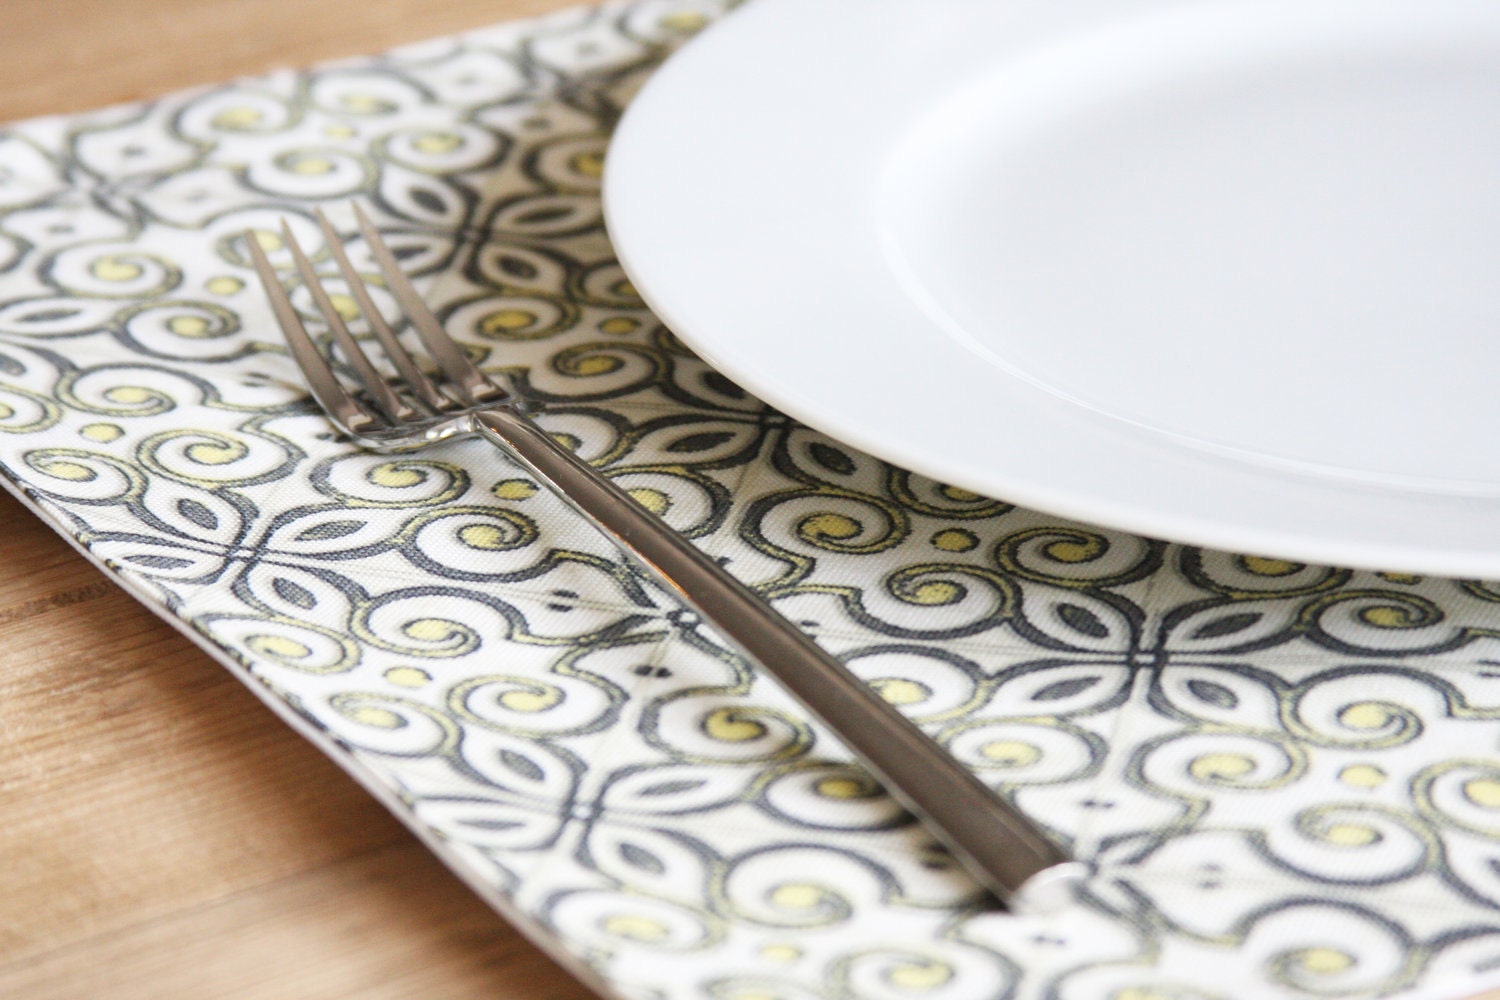 Fabric Placemats - Grey with Yellow Design - Set of 4 FREE SHIPPING - toocutecustomcrafts